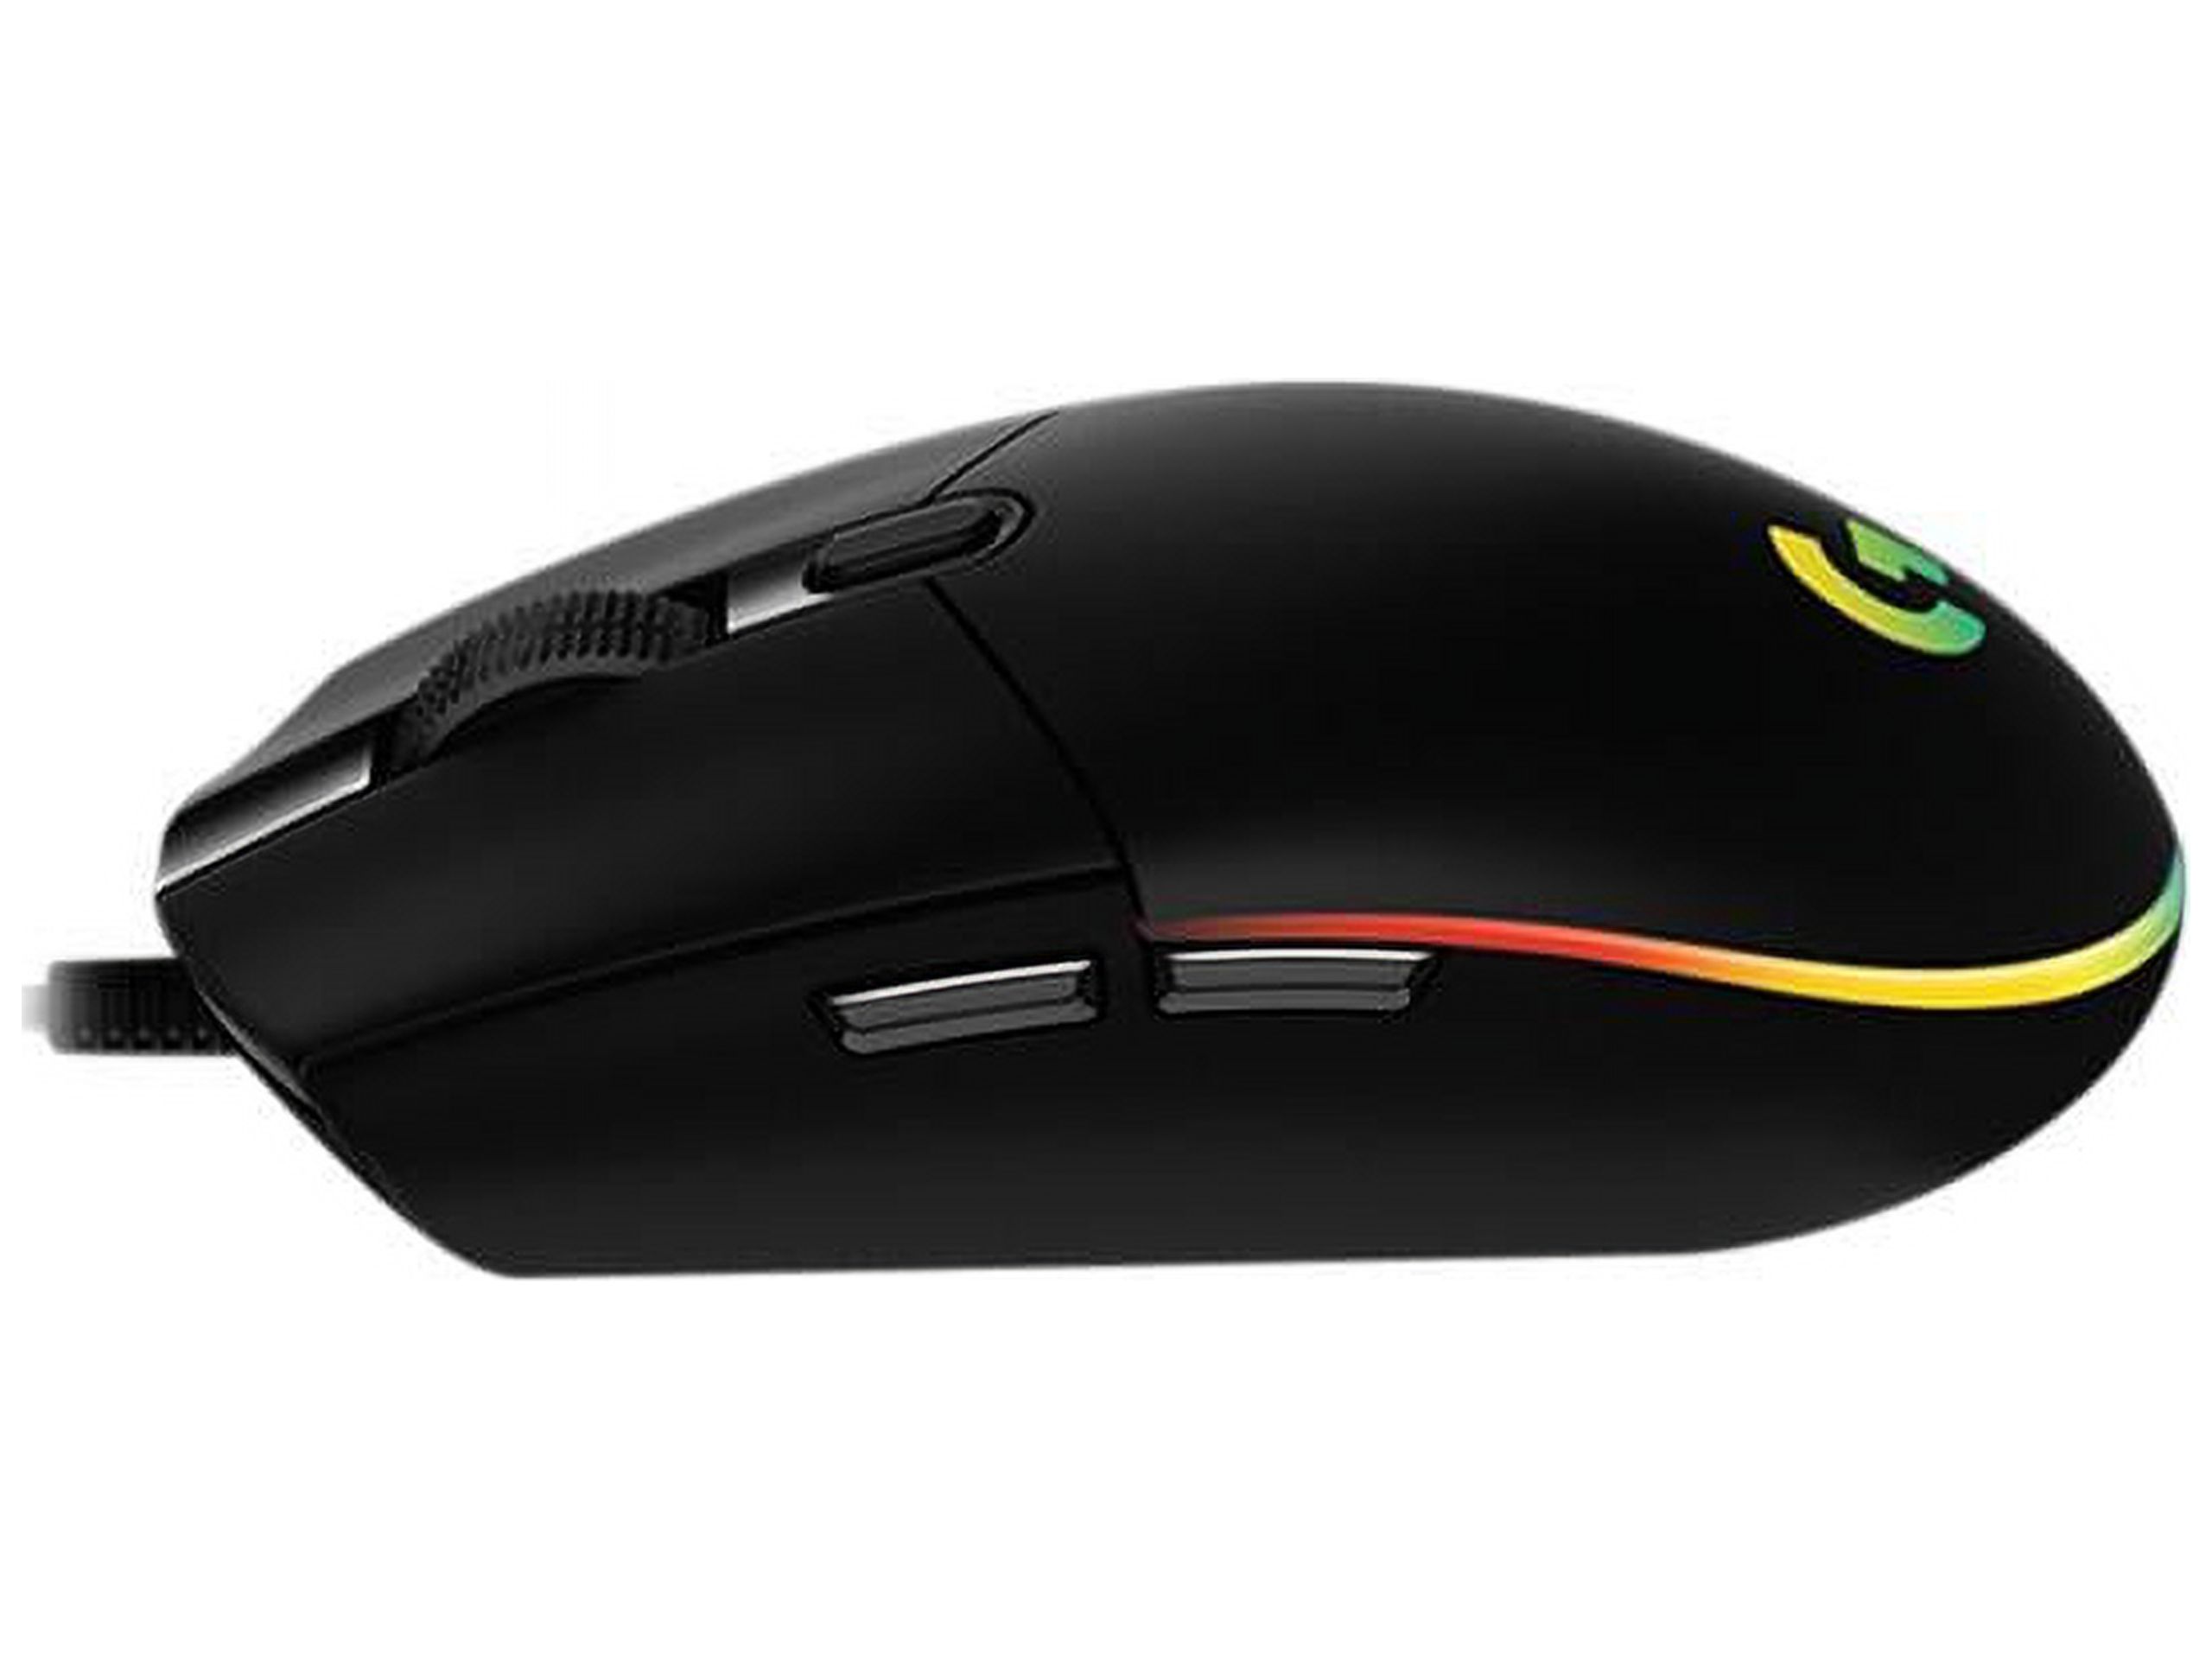 Logitech G203 Wired Gaming Mouse, 8,000 DPI, Rainbow Optical Effect LIGHTSYNC RGB, 6 Programmable Buttons, On-Board Memory, Screen Mapping, PC/Mac Computer and Laptop Compatible - Black - image 2 of 7